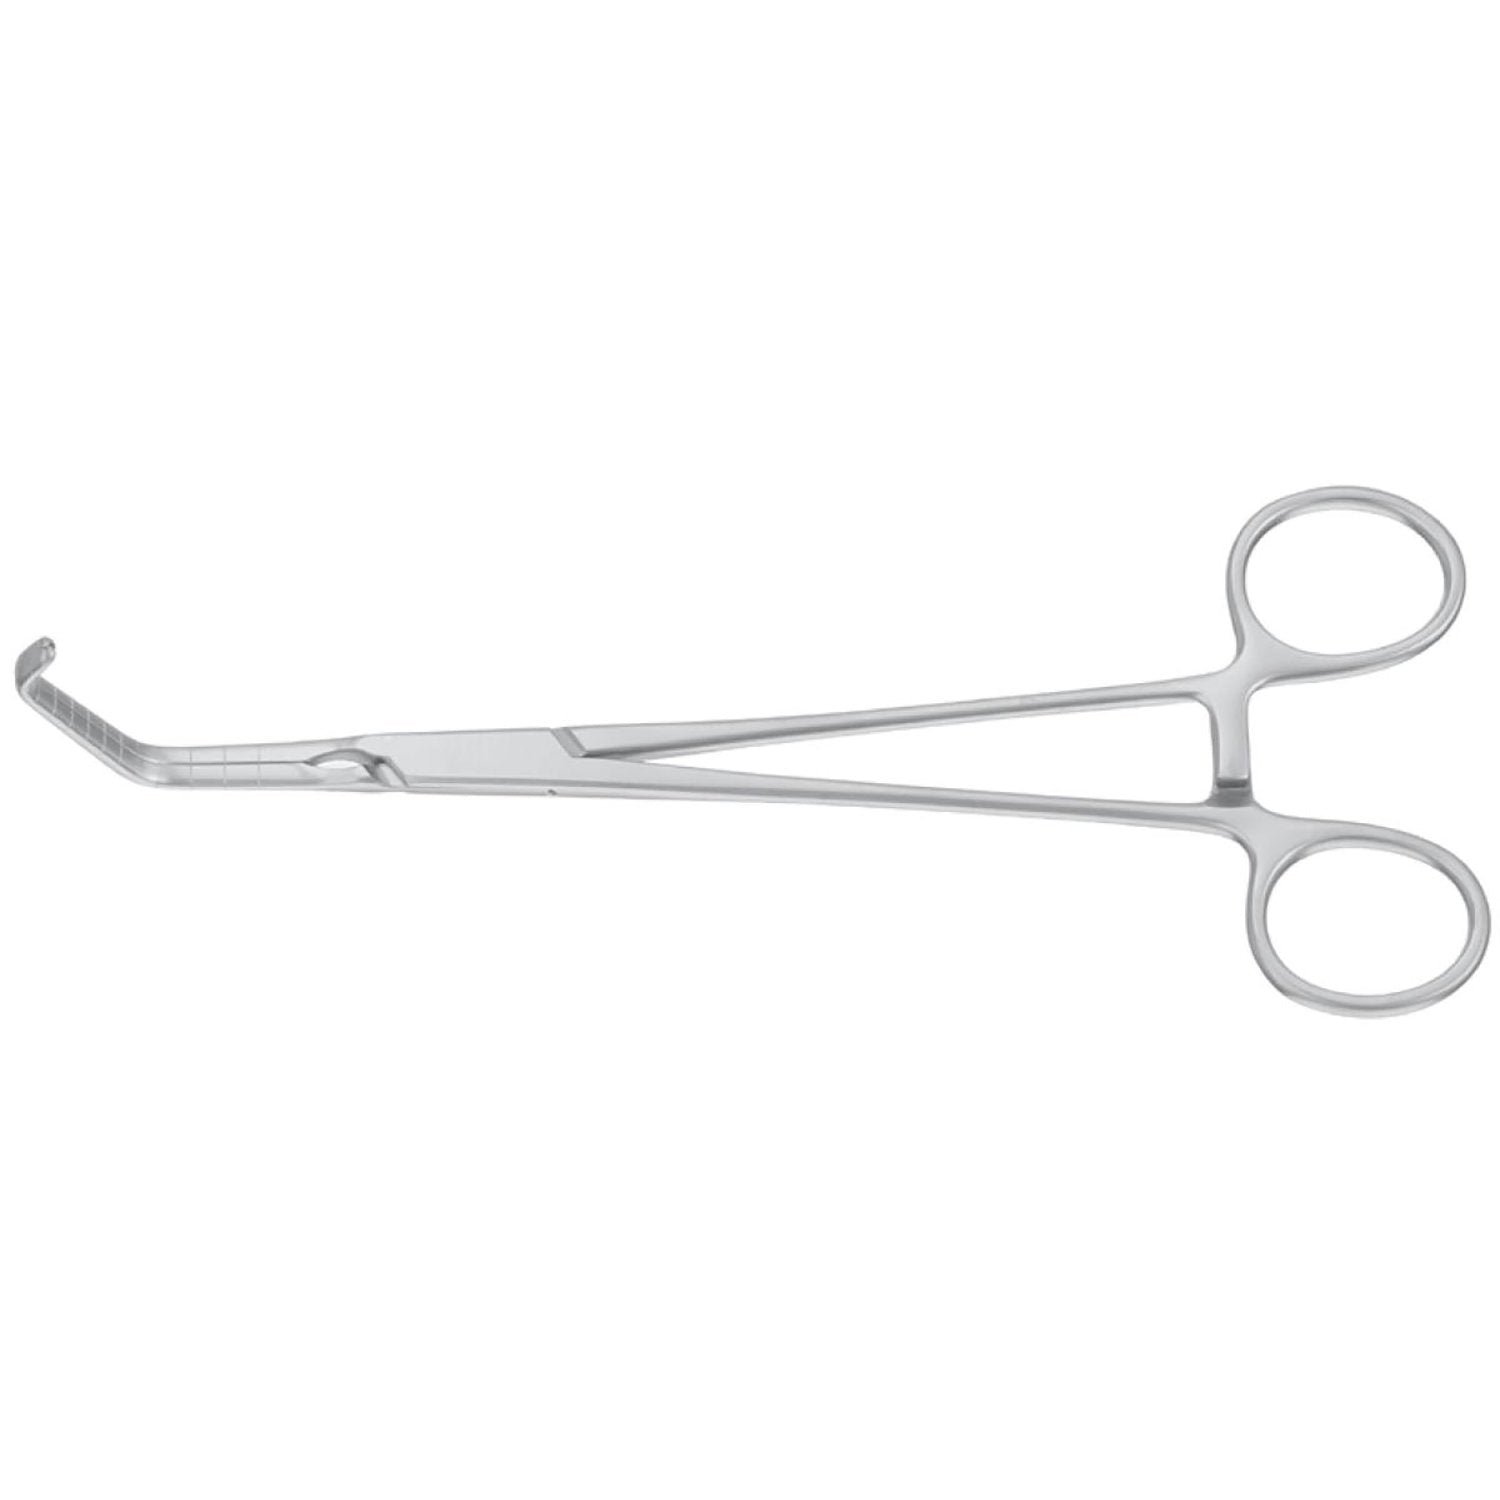 Bailey Aortic Clamps